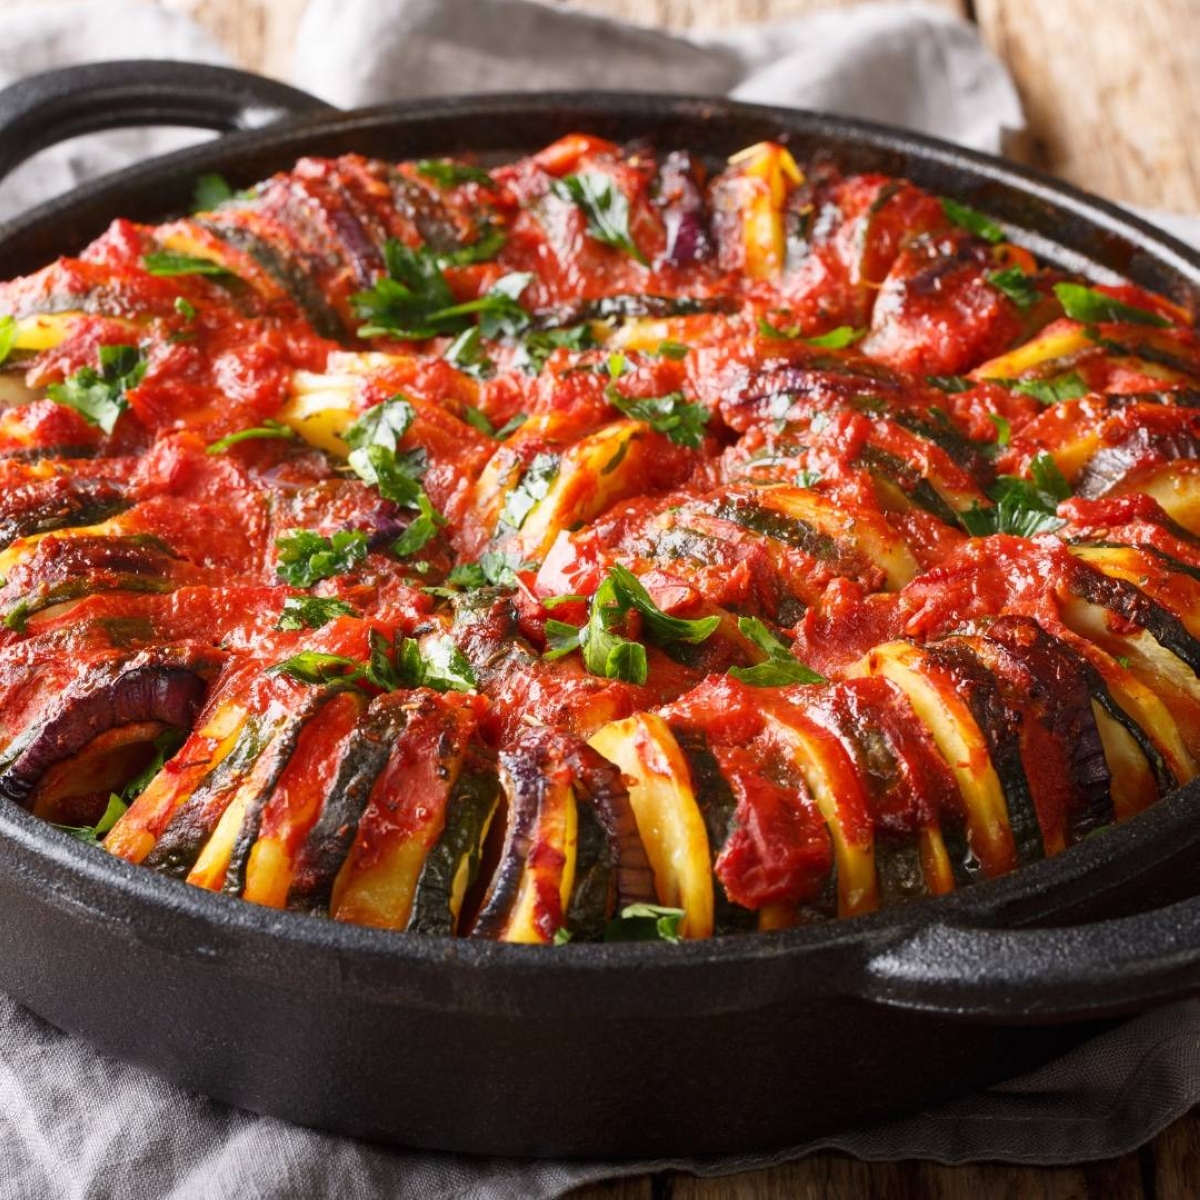 Delight in Greece's roast vegetable dish called Briam which uses easy-to-find ingredients.